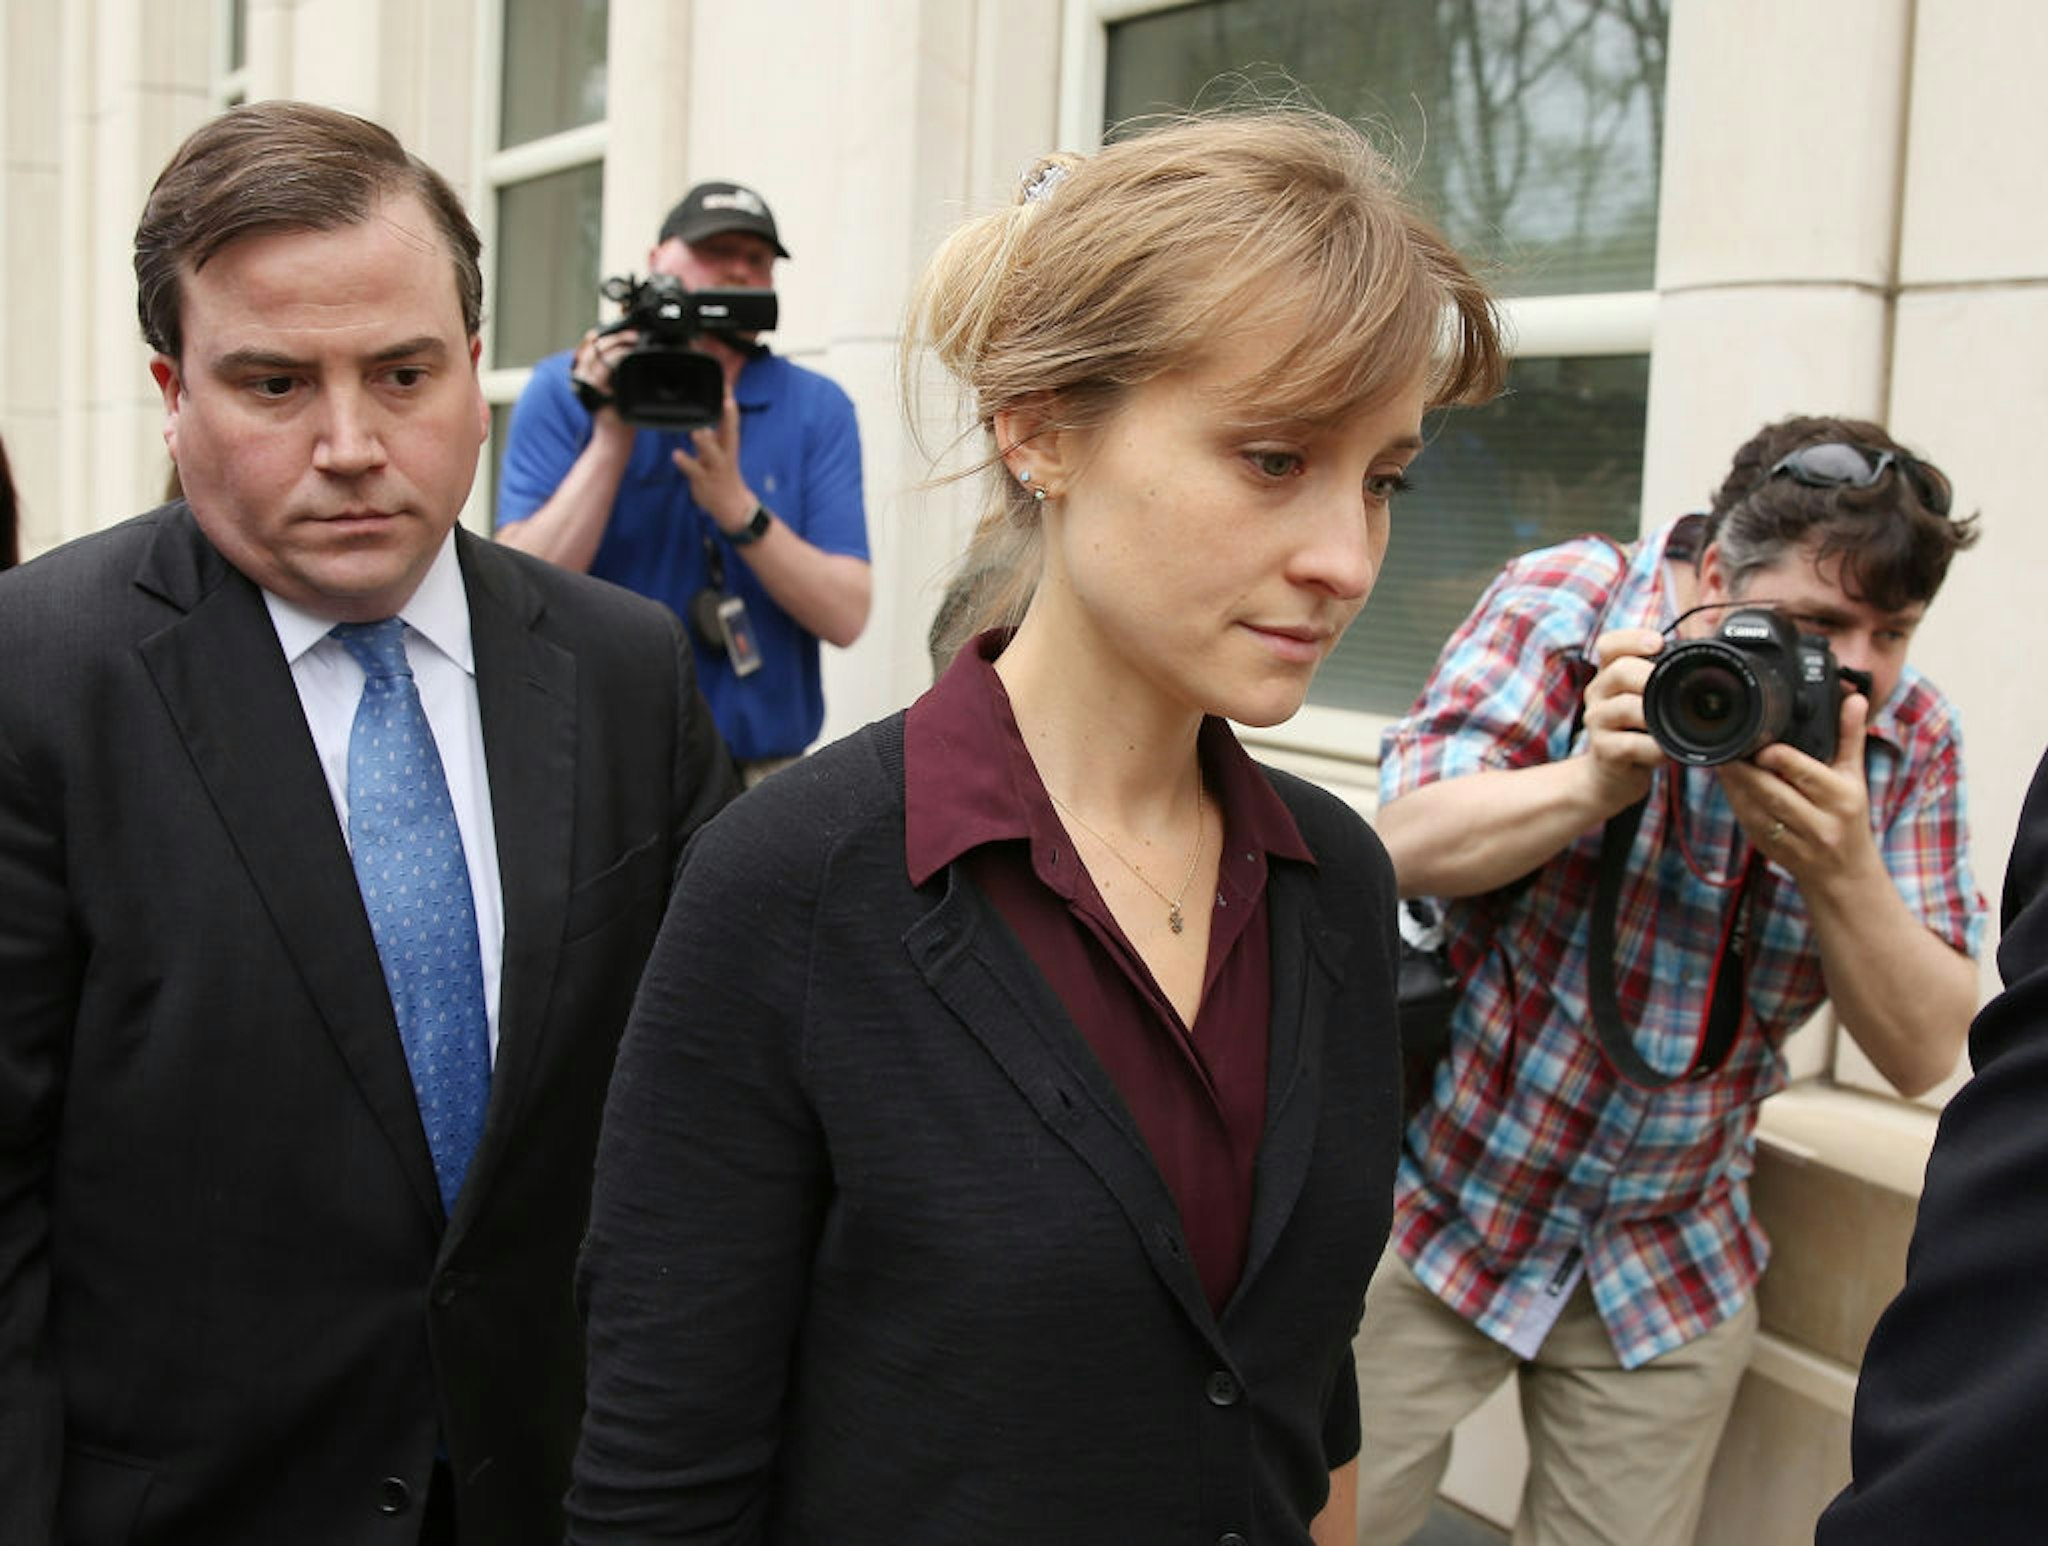 Actress Allison Mack (C) departs the United States Eastern District Court after a bail hearing in relation to the sex trafficking charges filed against her on May 4, 2018 in the Brooklyn borough of New York City.